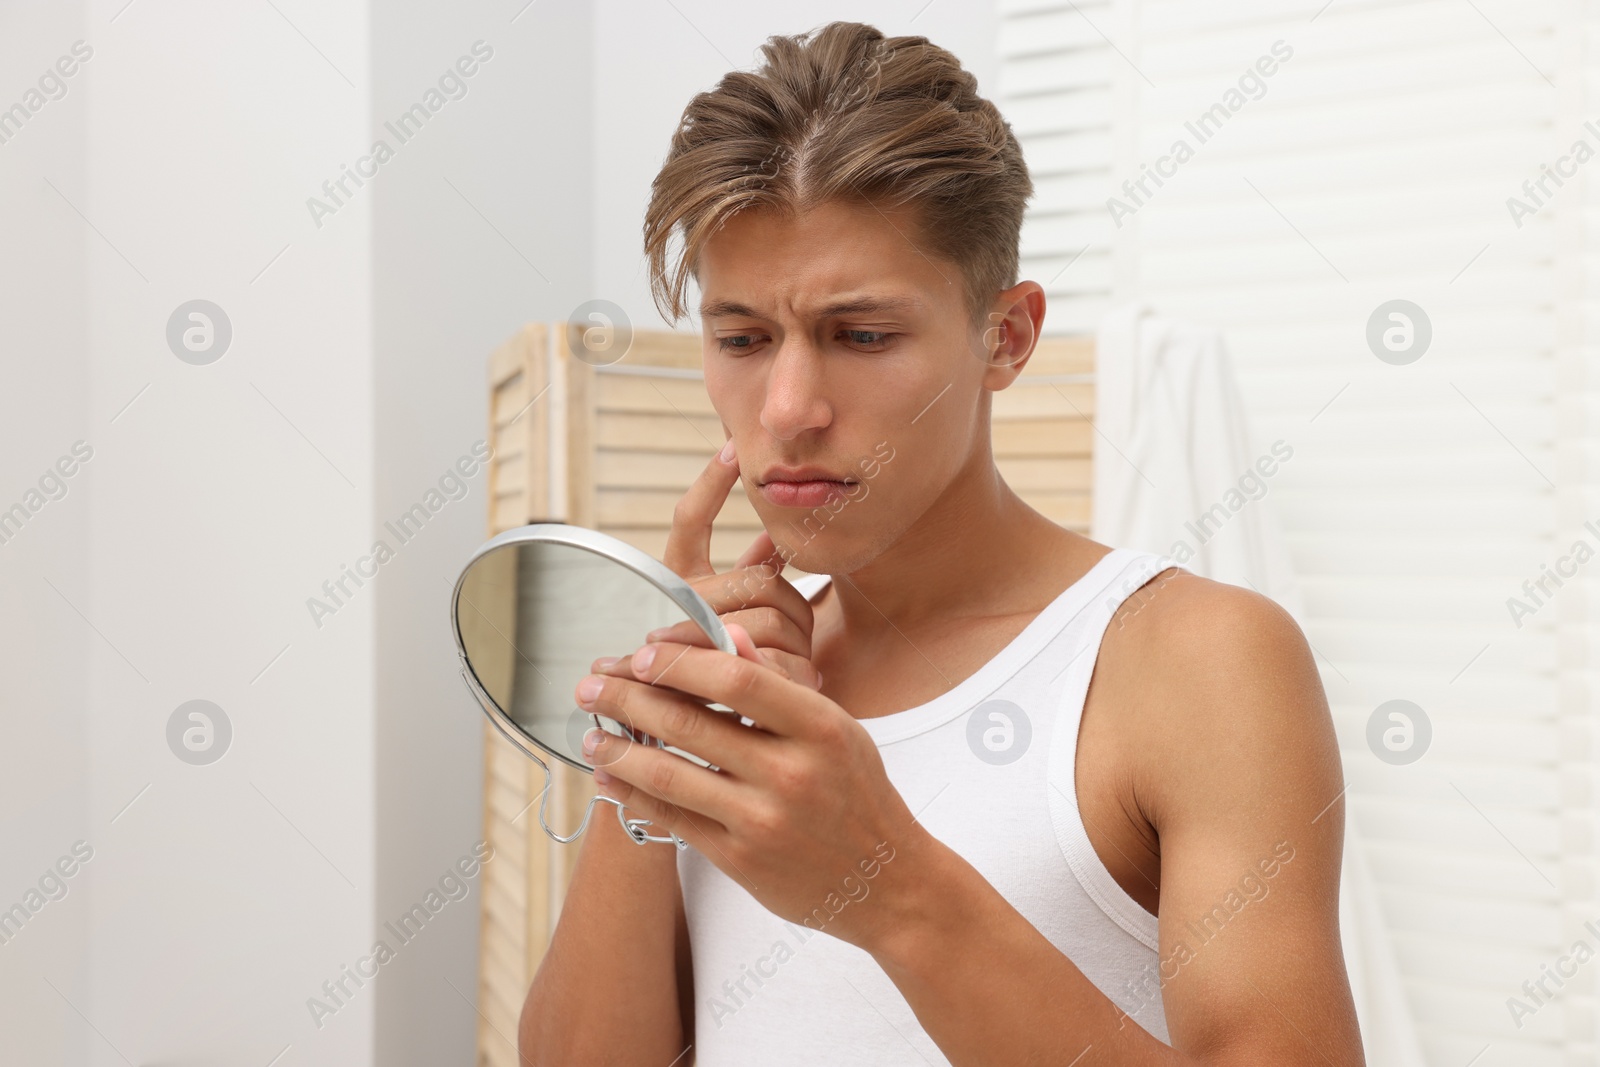 Photo of Upset young man looking at mirror and touching pimple on his face indoors. Acne problem